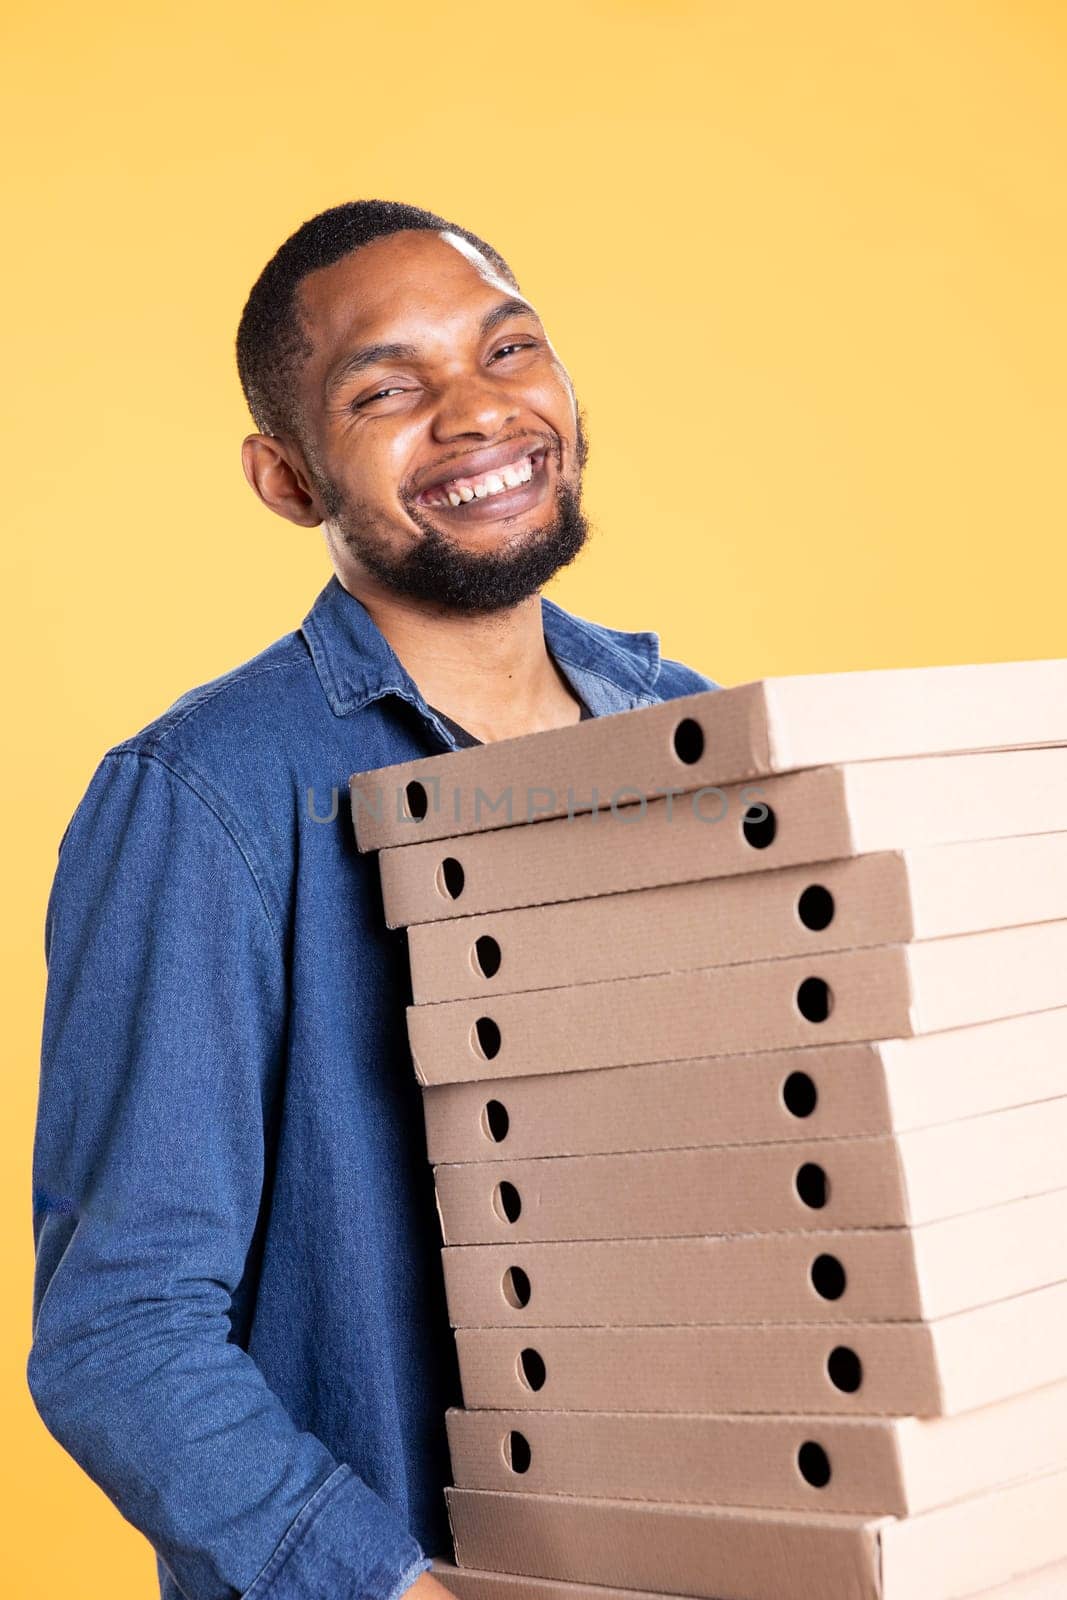 African american pizzeria deliveryman holding pile of pizza boxes to delivering food order to customer in studio. Friendly takeaway service worker carries takeout meal stack package.